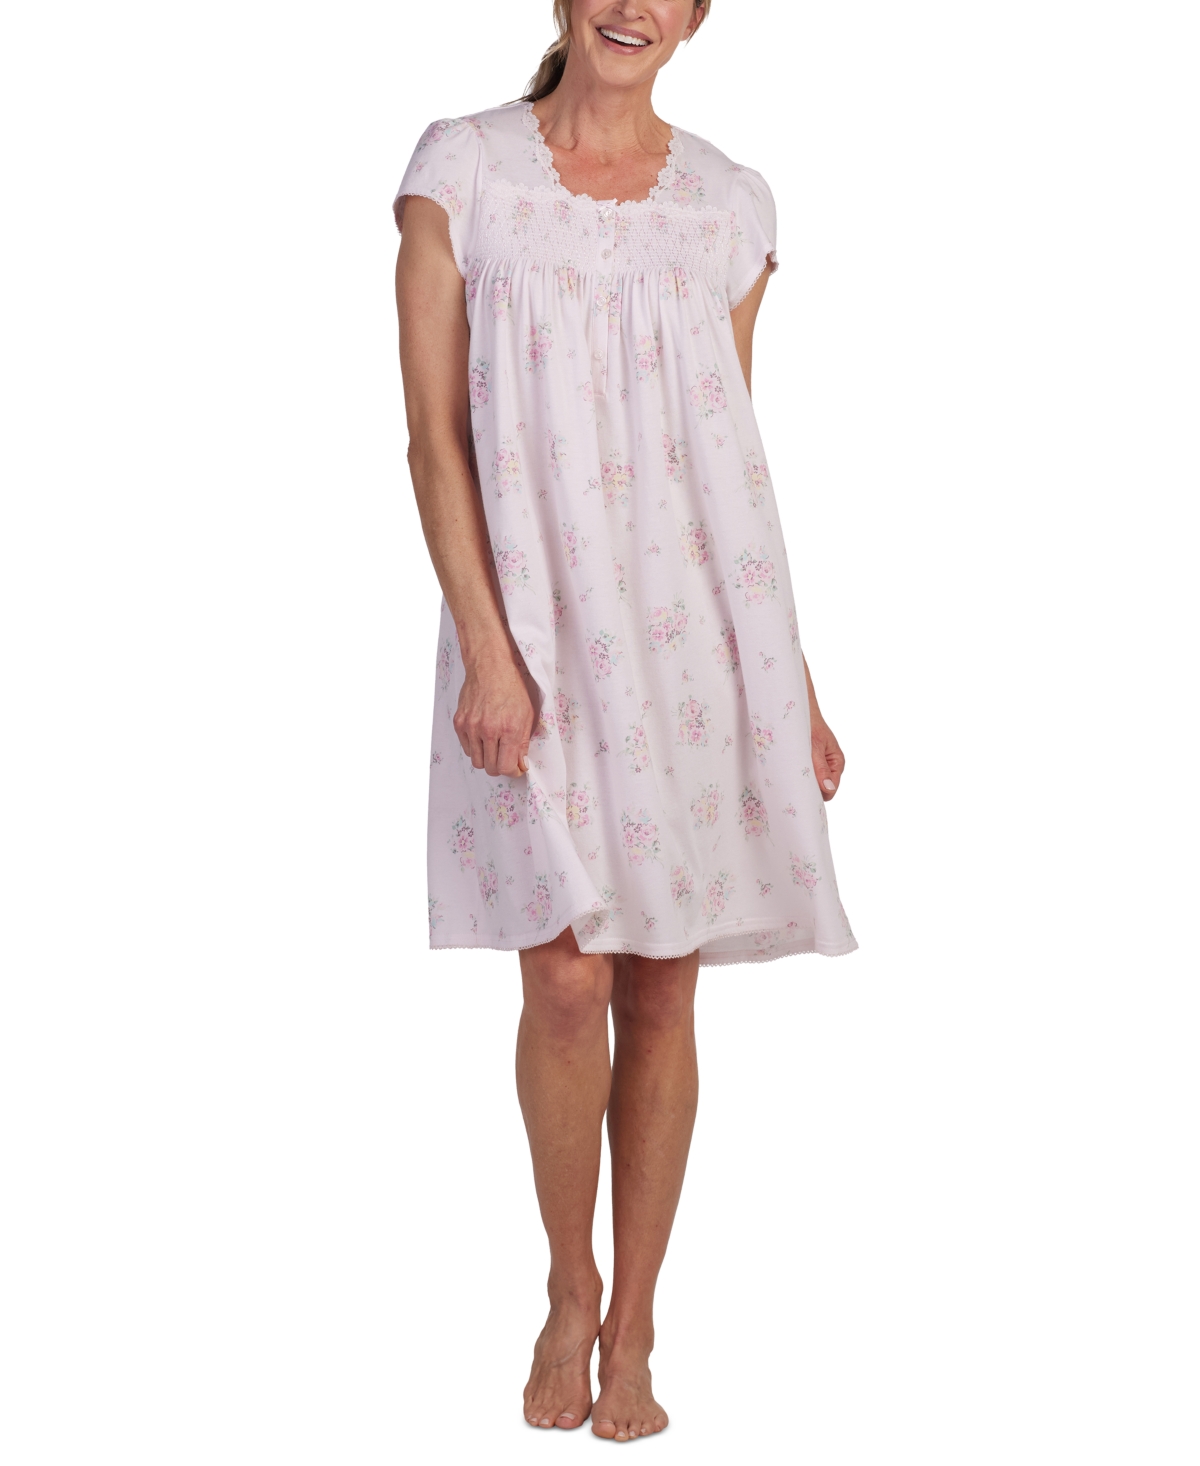 Women's Smocked Floral Lace-Trim Nightgown - Spring